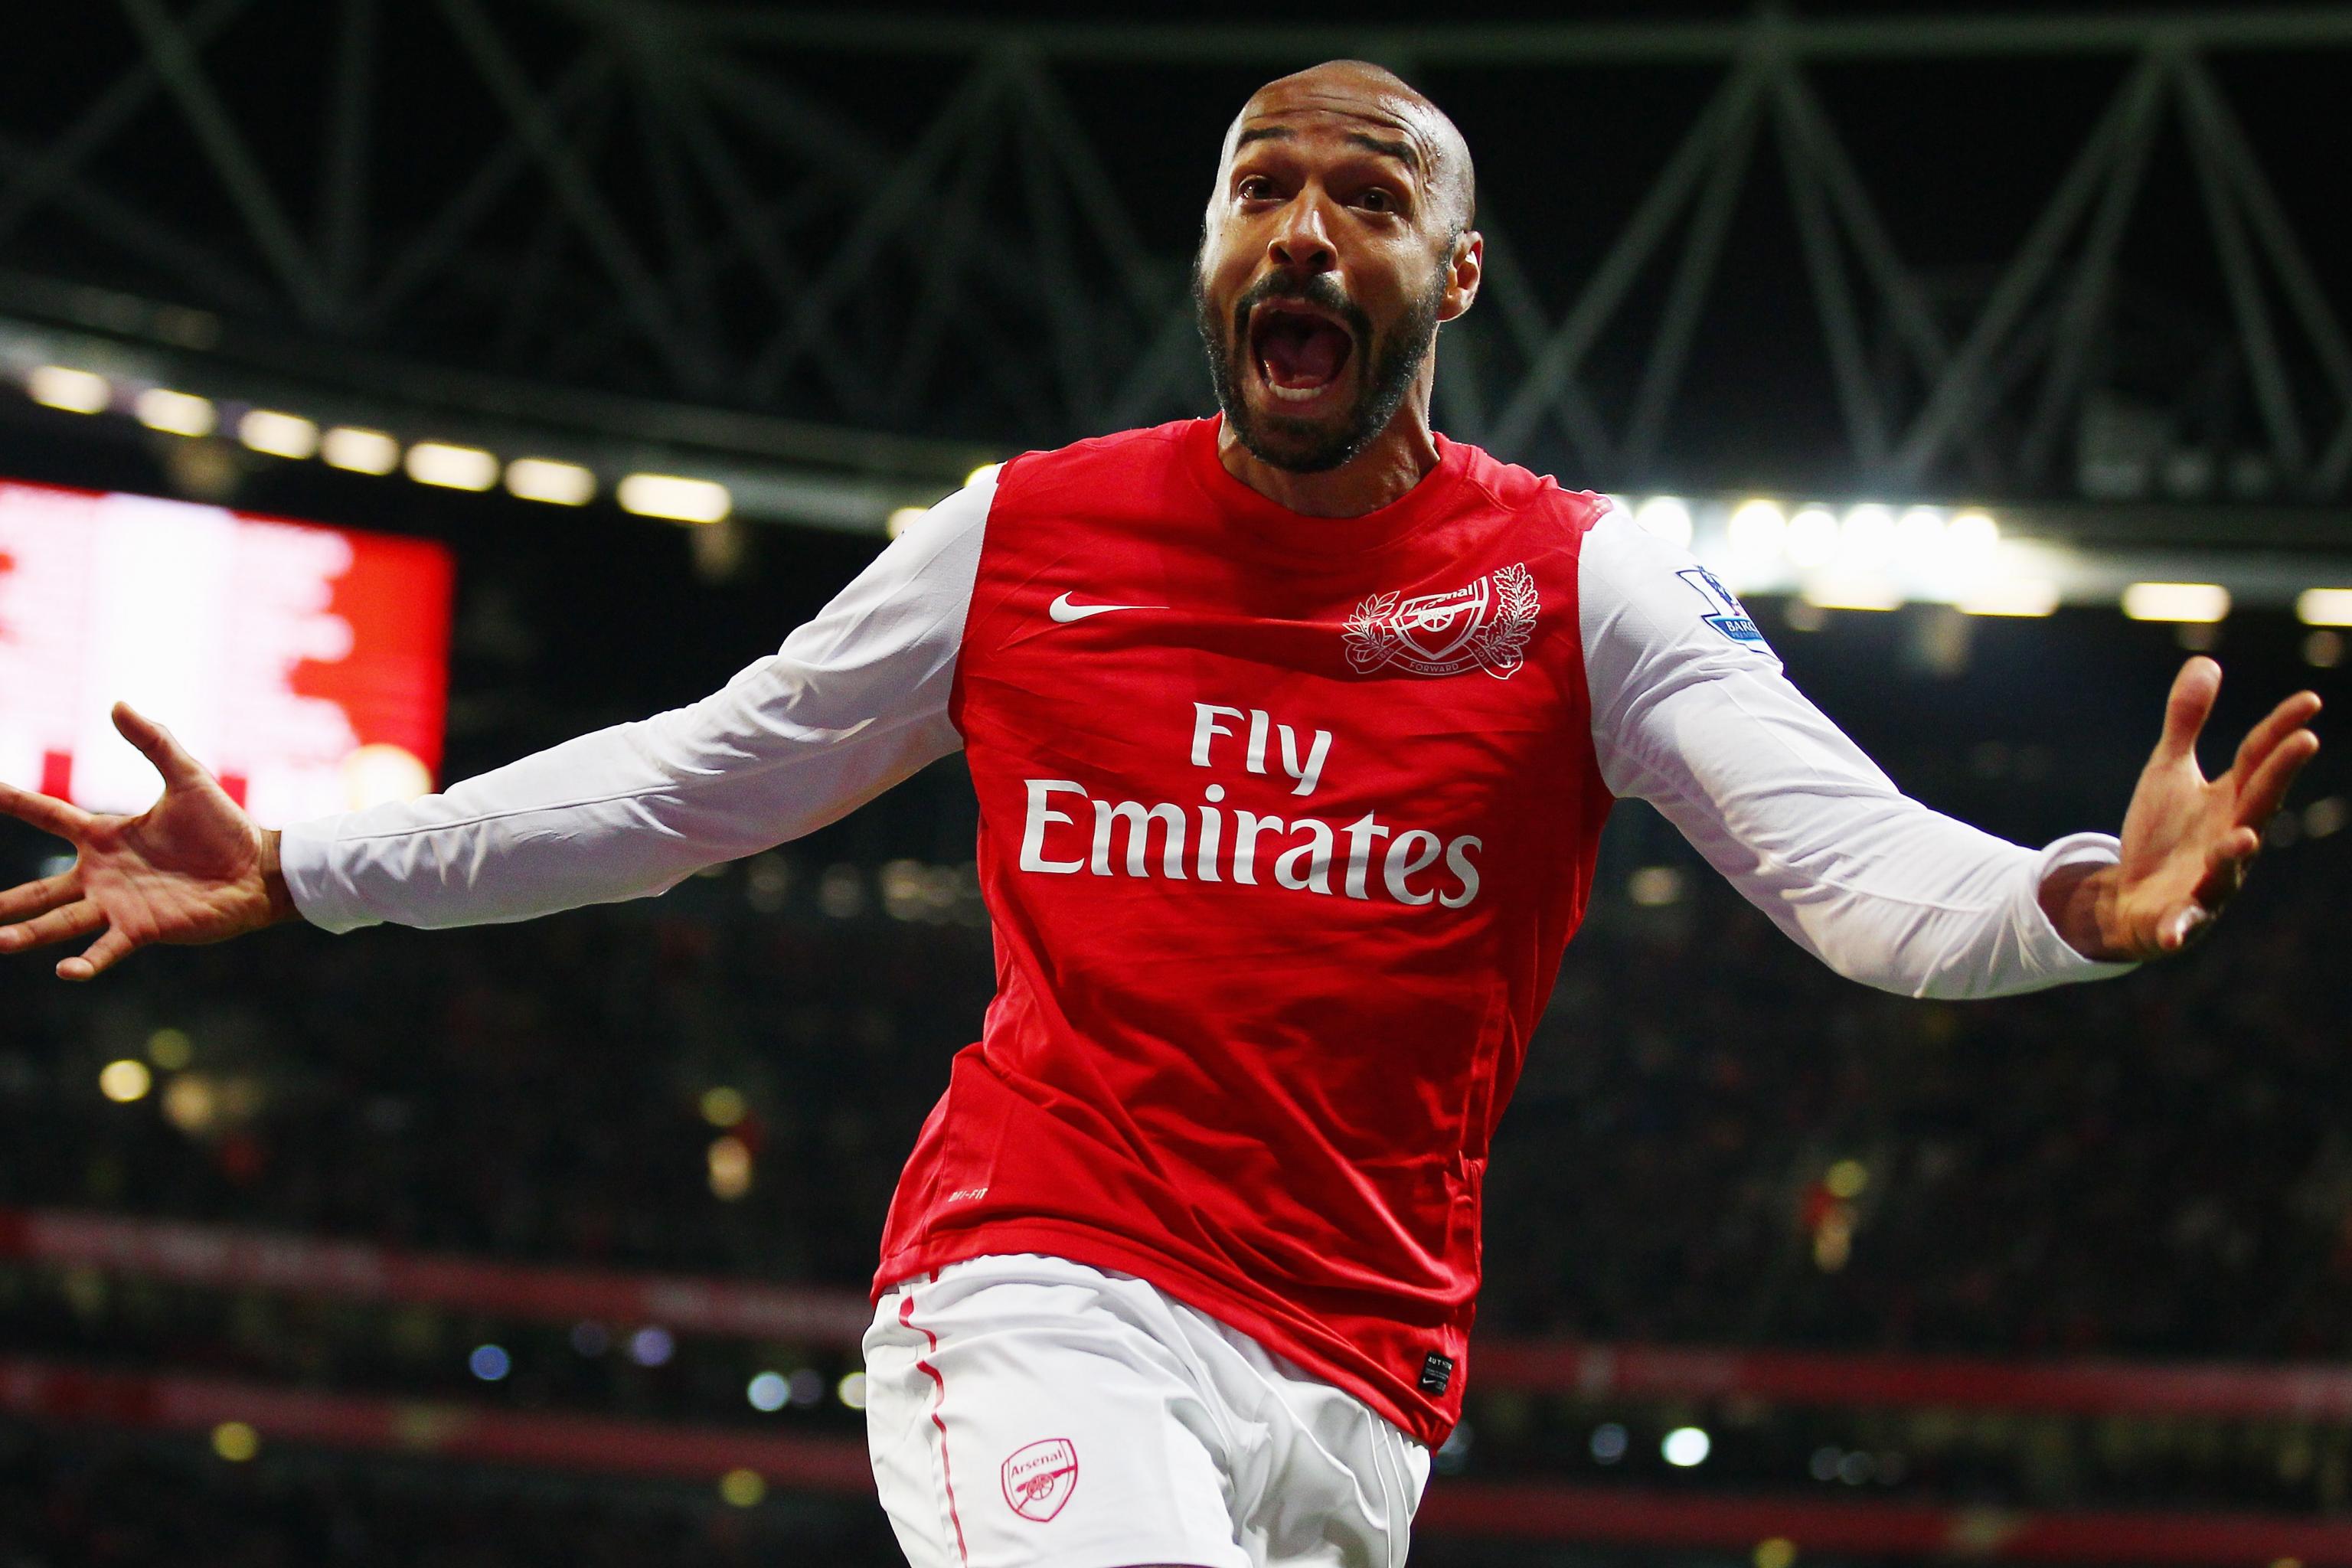 Thierry Henry preferred playing for Arsenal than Barcelona chess